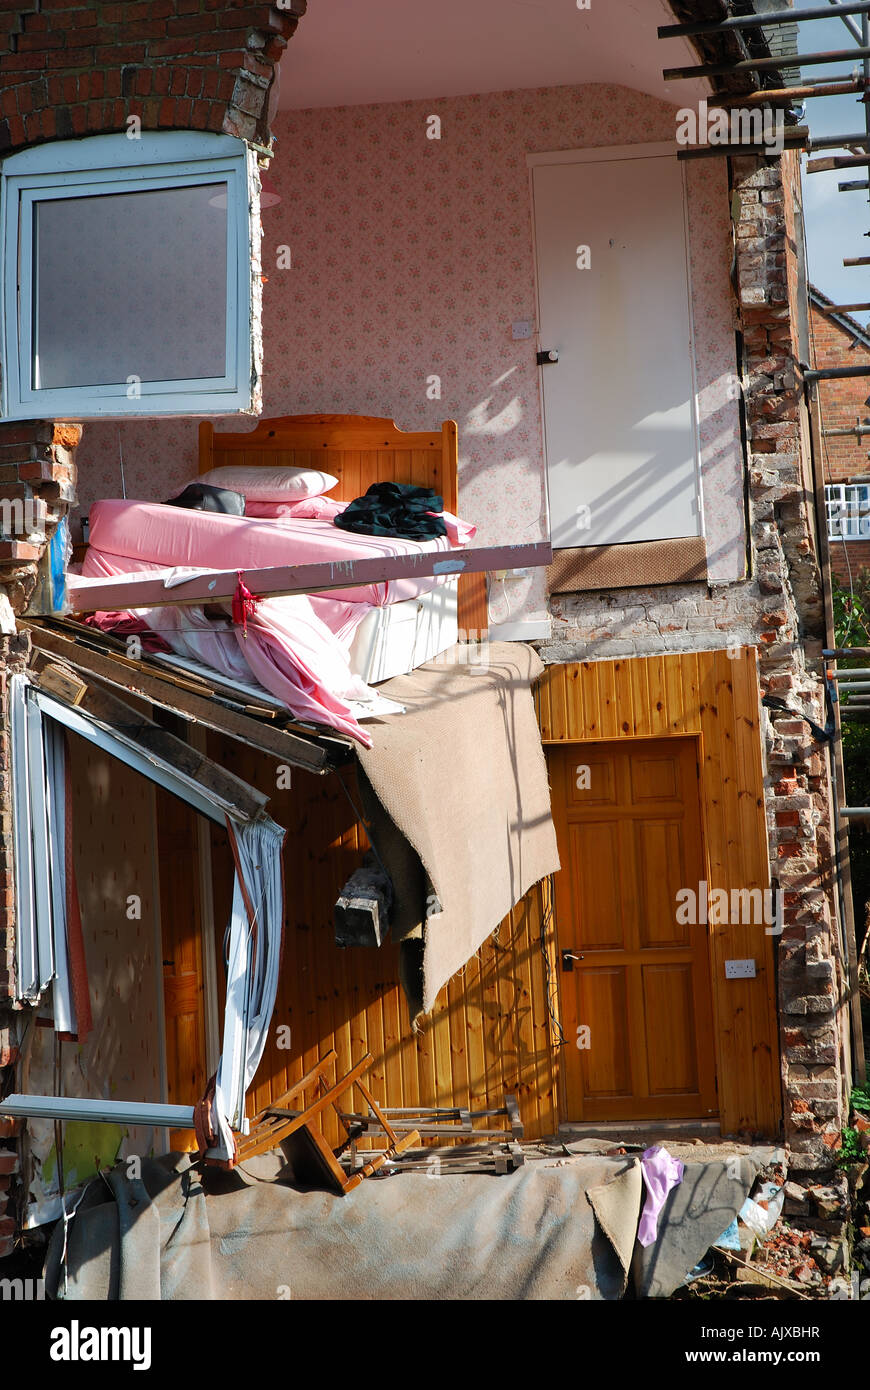 Ludlow, England, UK: bed hangs in mid-air in collapsed corner of a house caused by severe flooding June 2007 Stock Photo